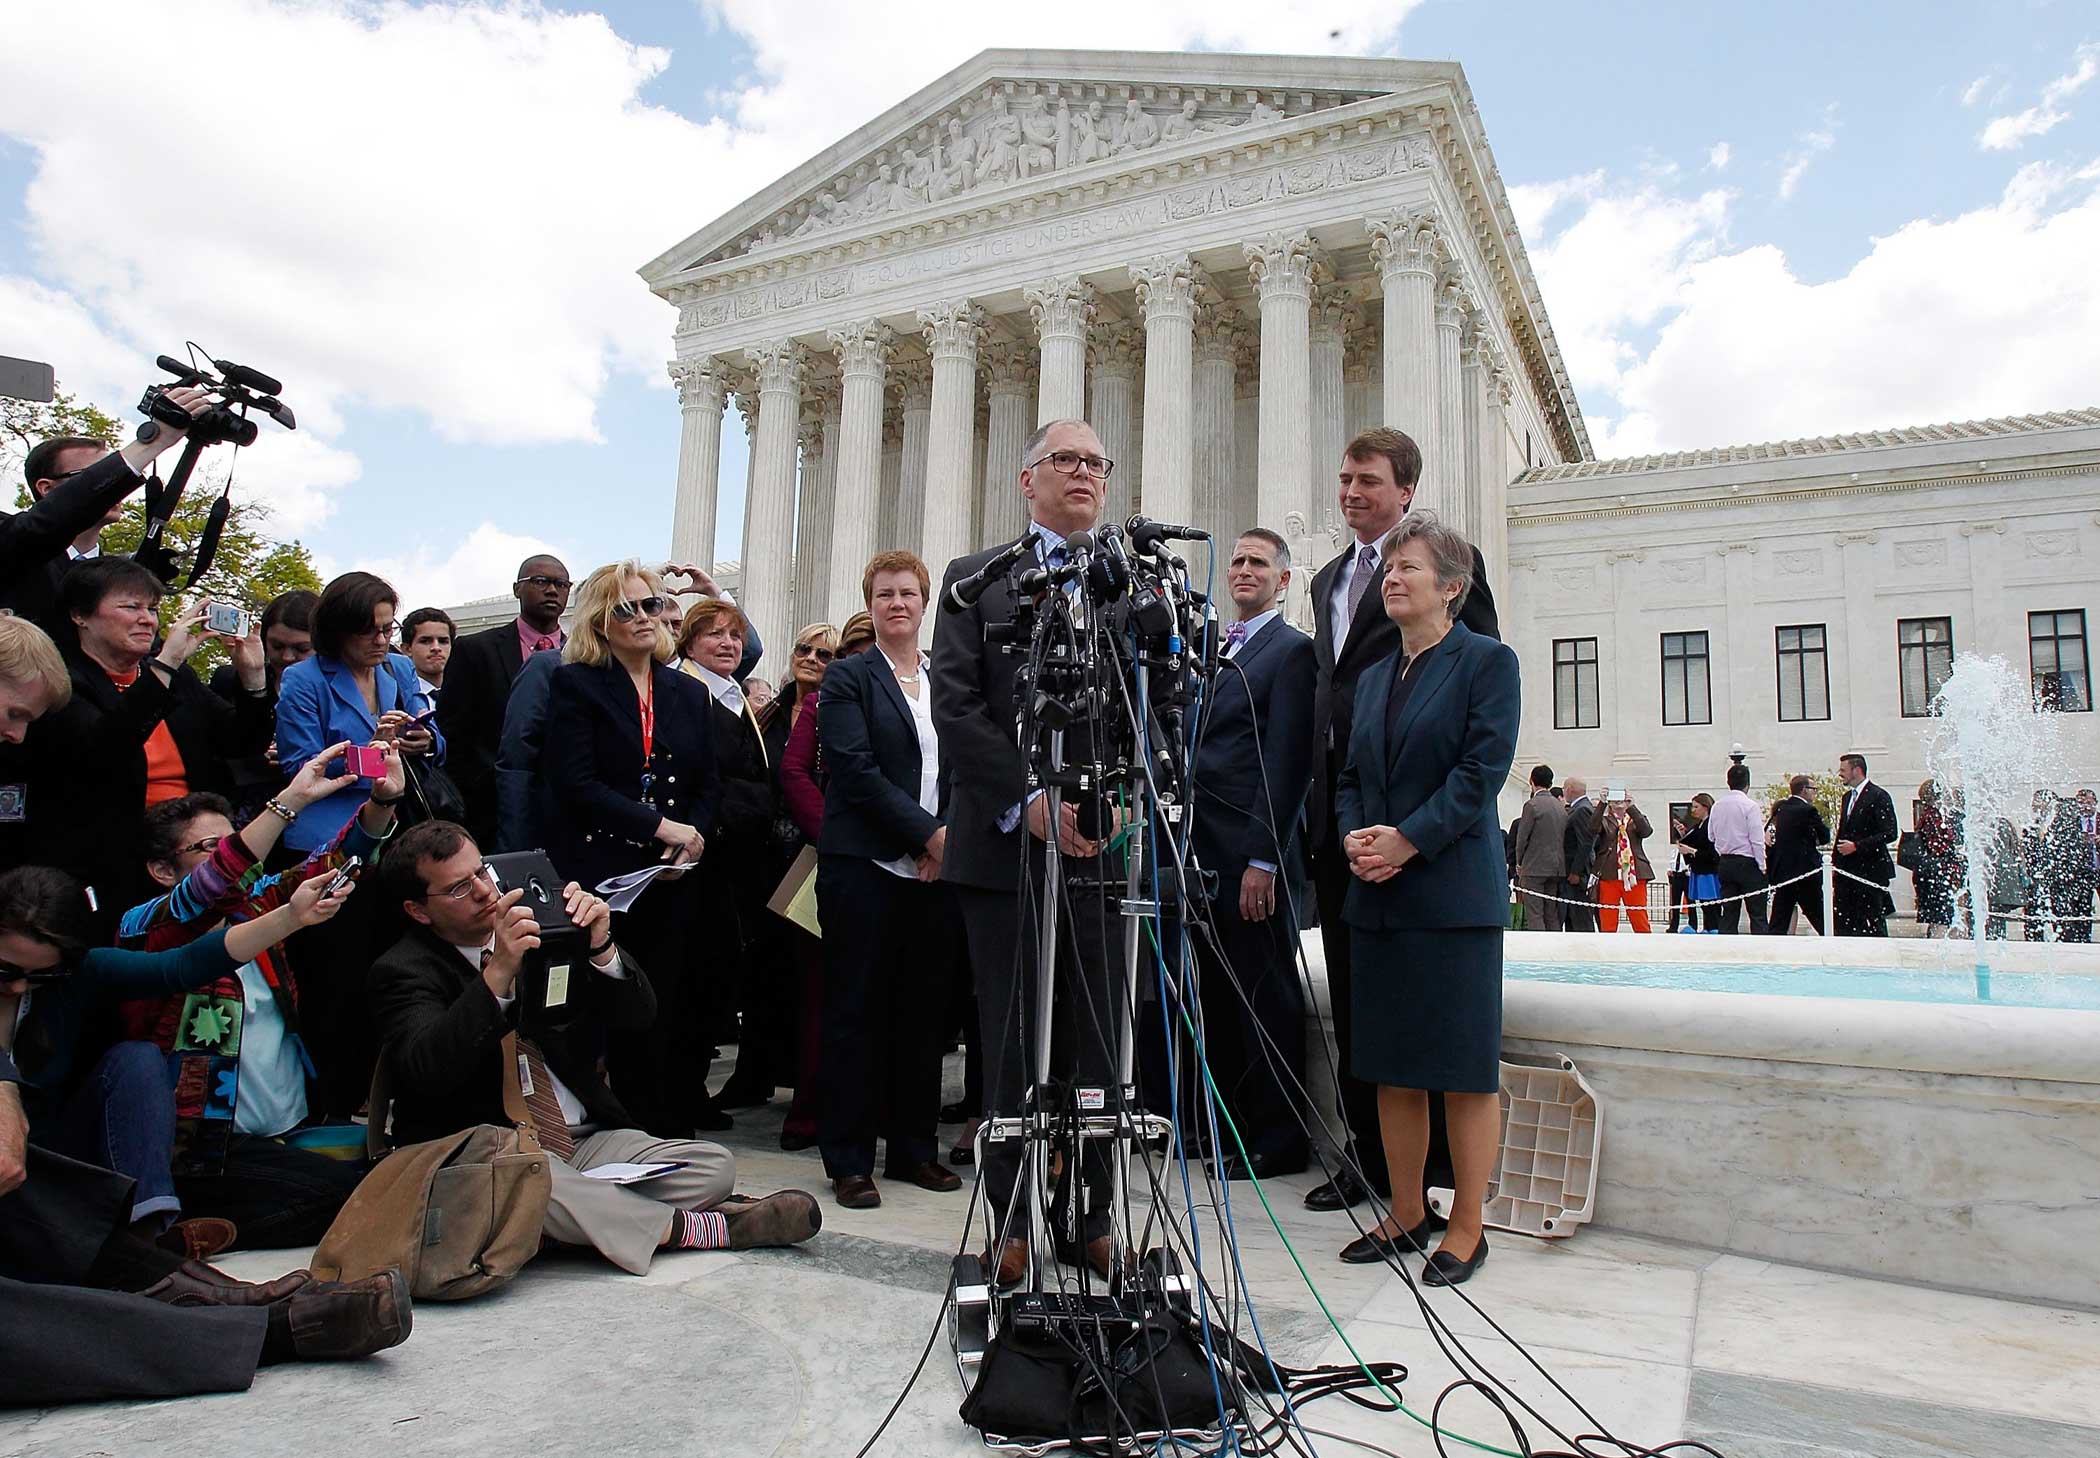 Jim Obergefell, the plaintiff in the marriage equality case, speaks outside of the  Supreme Court of the United States on April 28, 2015 in Washington.